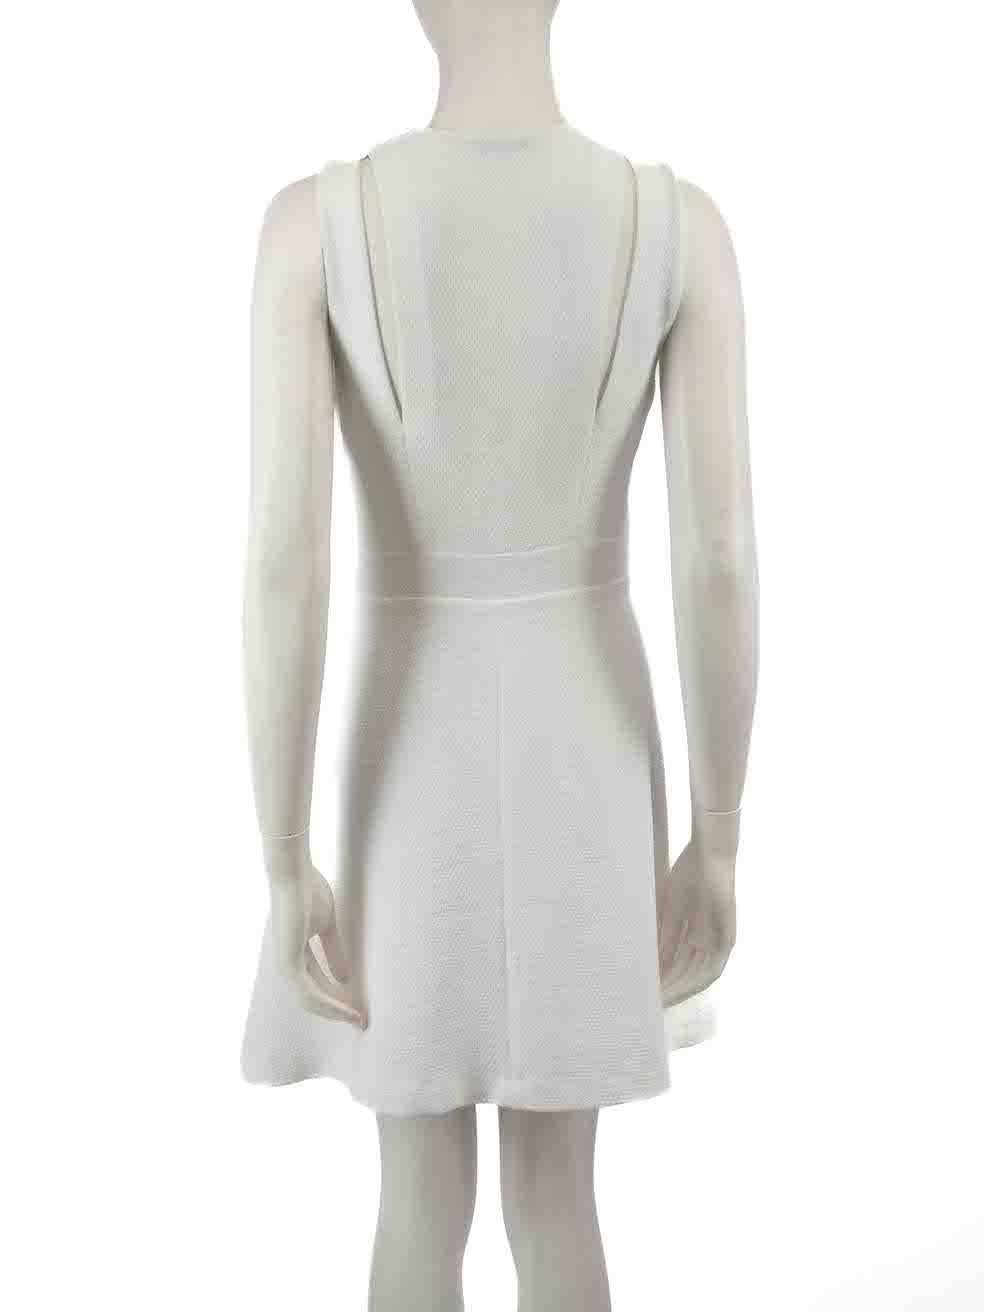 Sandro White Cut Out Detail Mini Dress Size M In Good Condition For Sale In London, GB